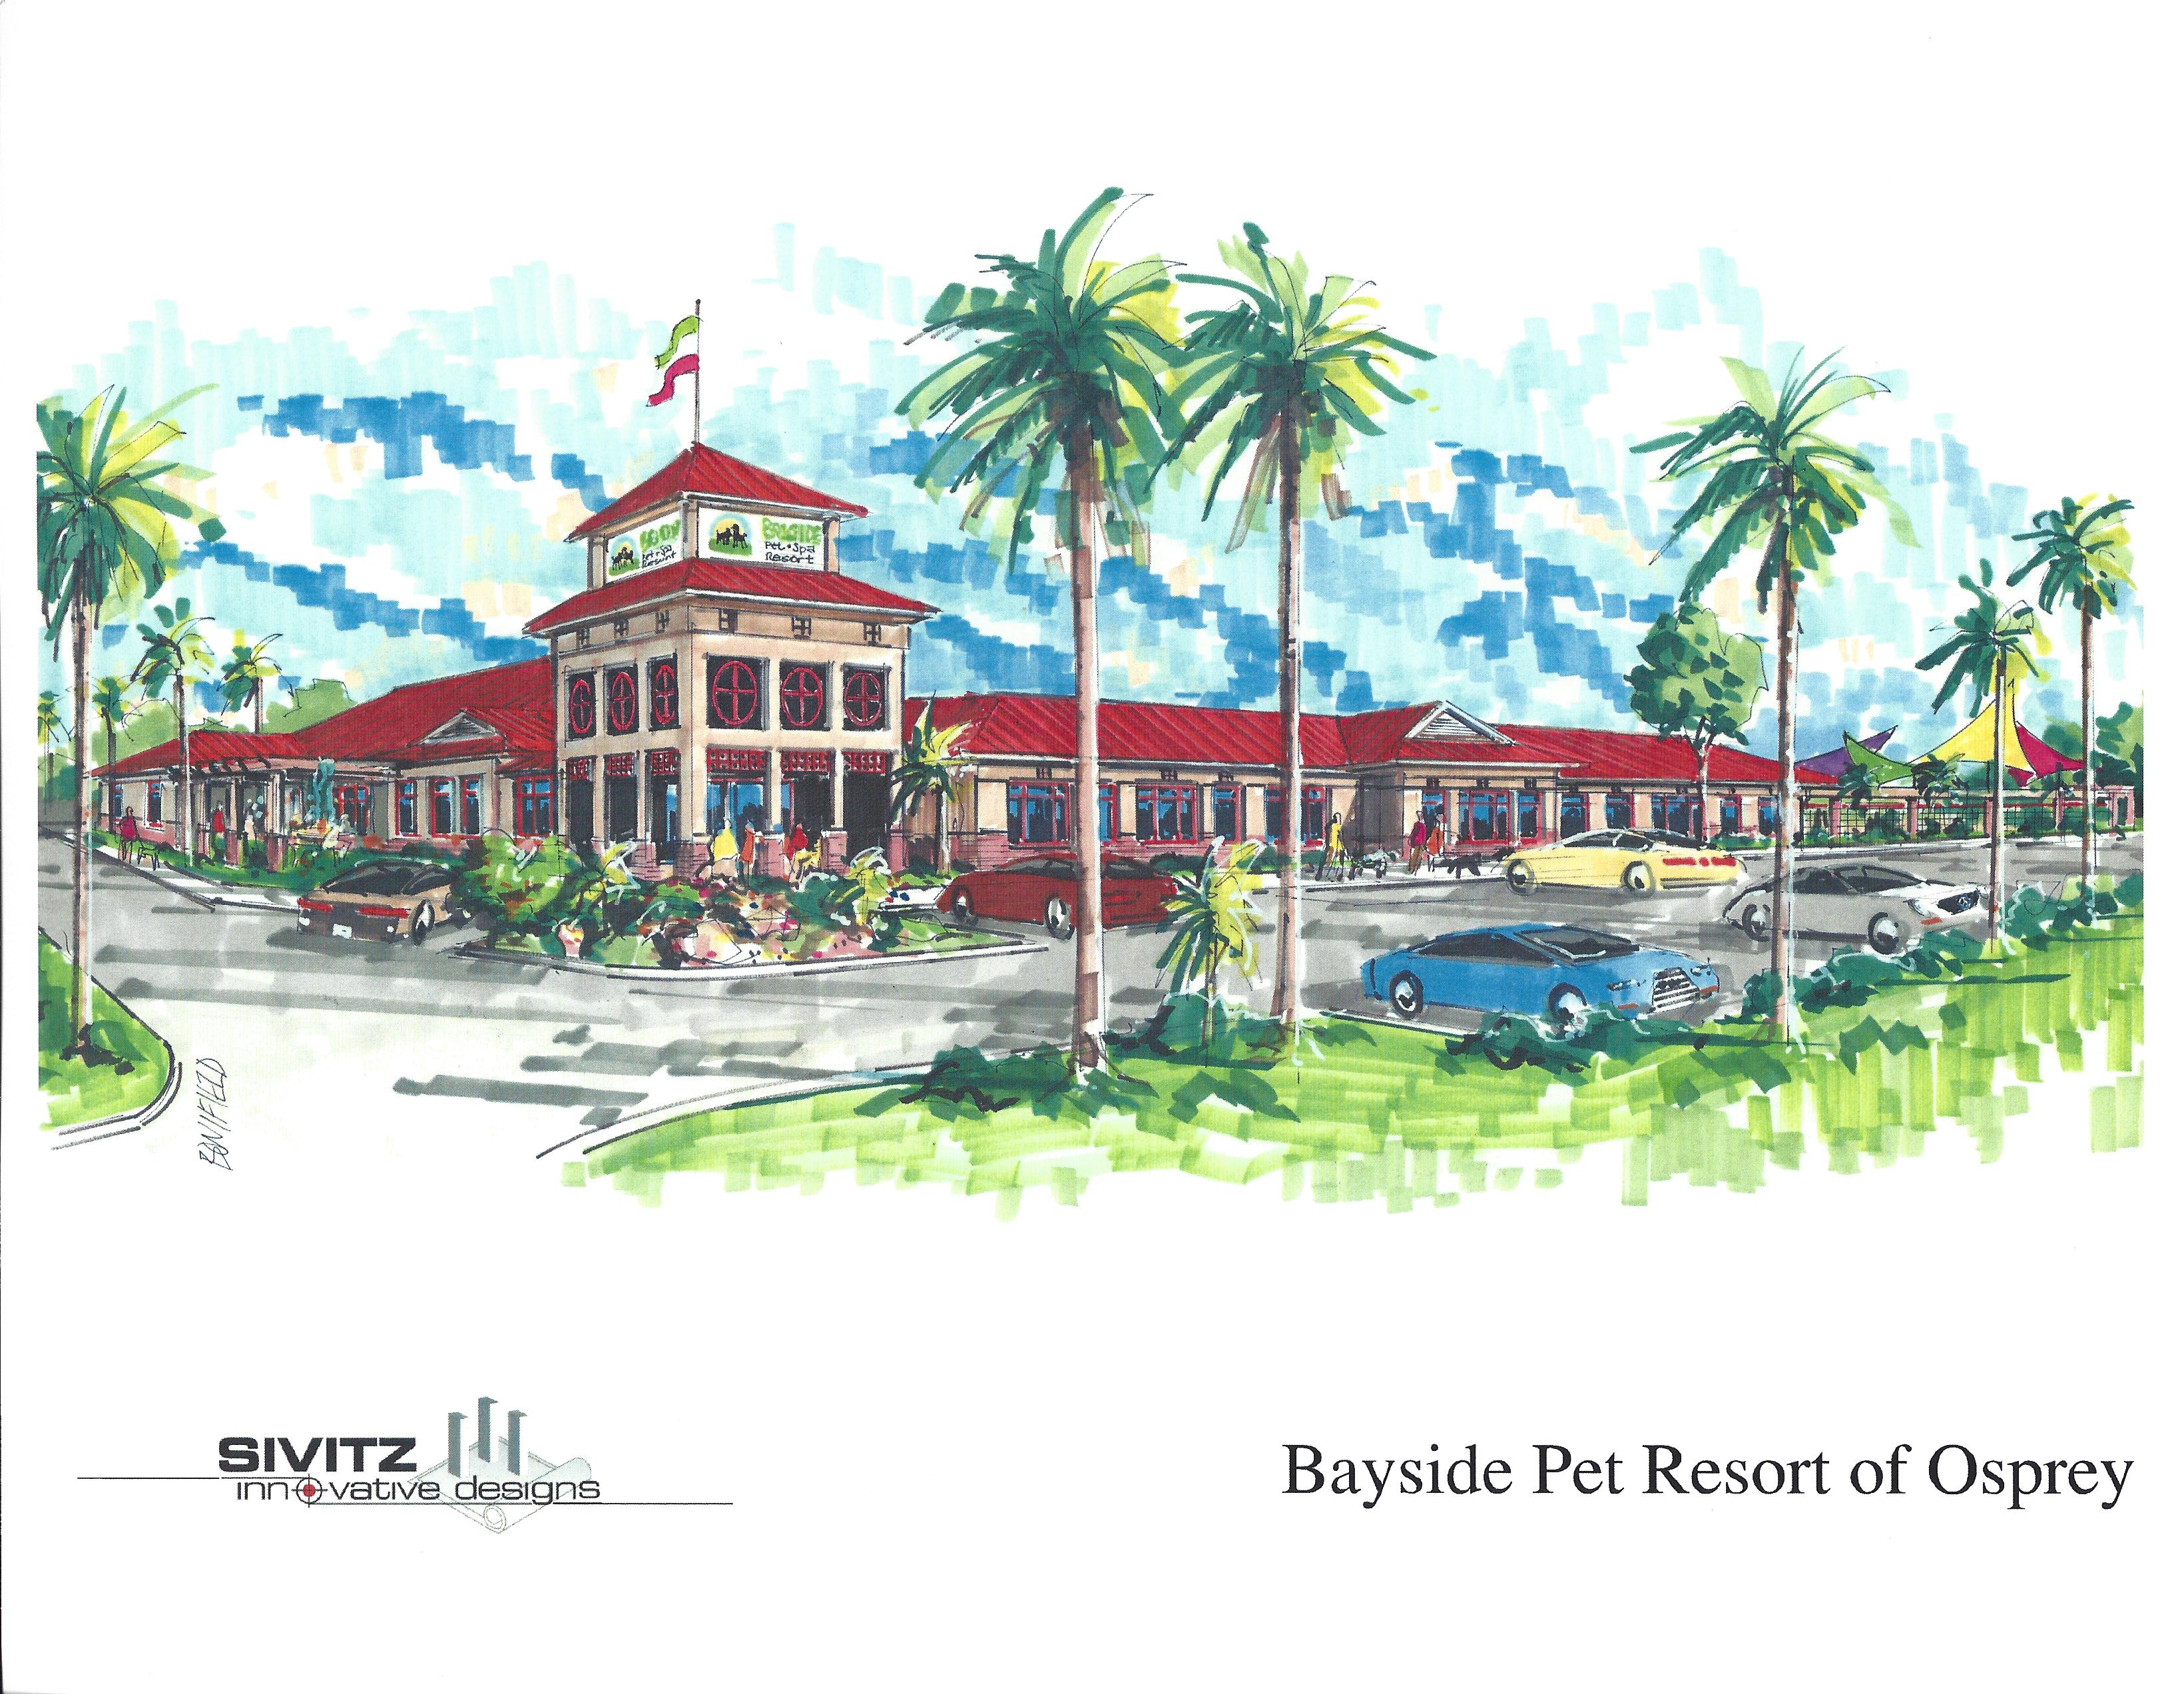 Rendering of the new Bayside Pet Resort & Spa location